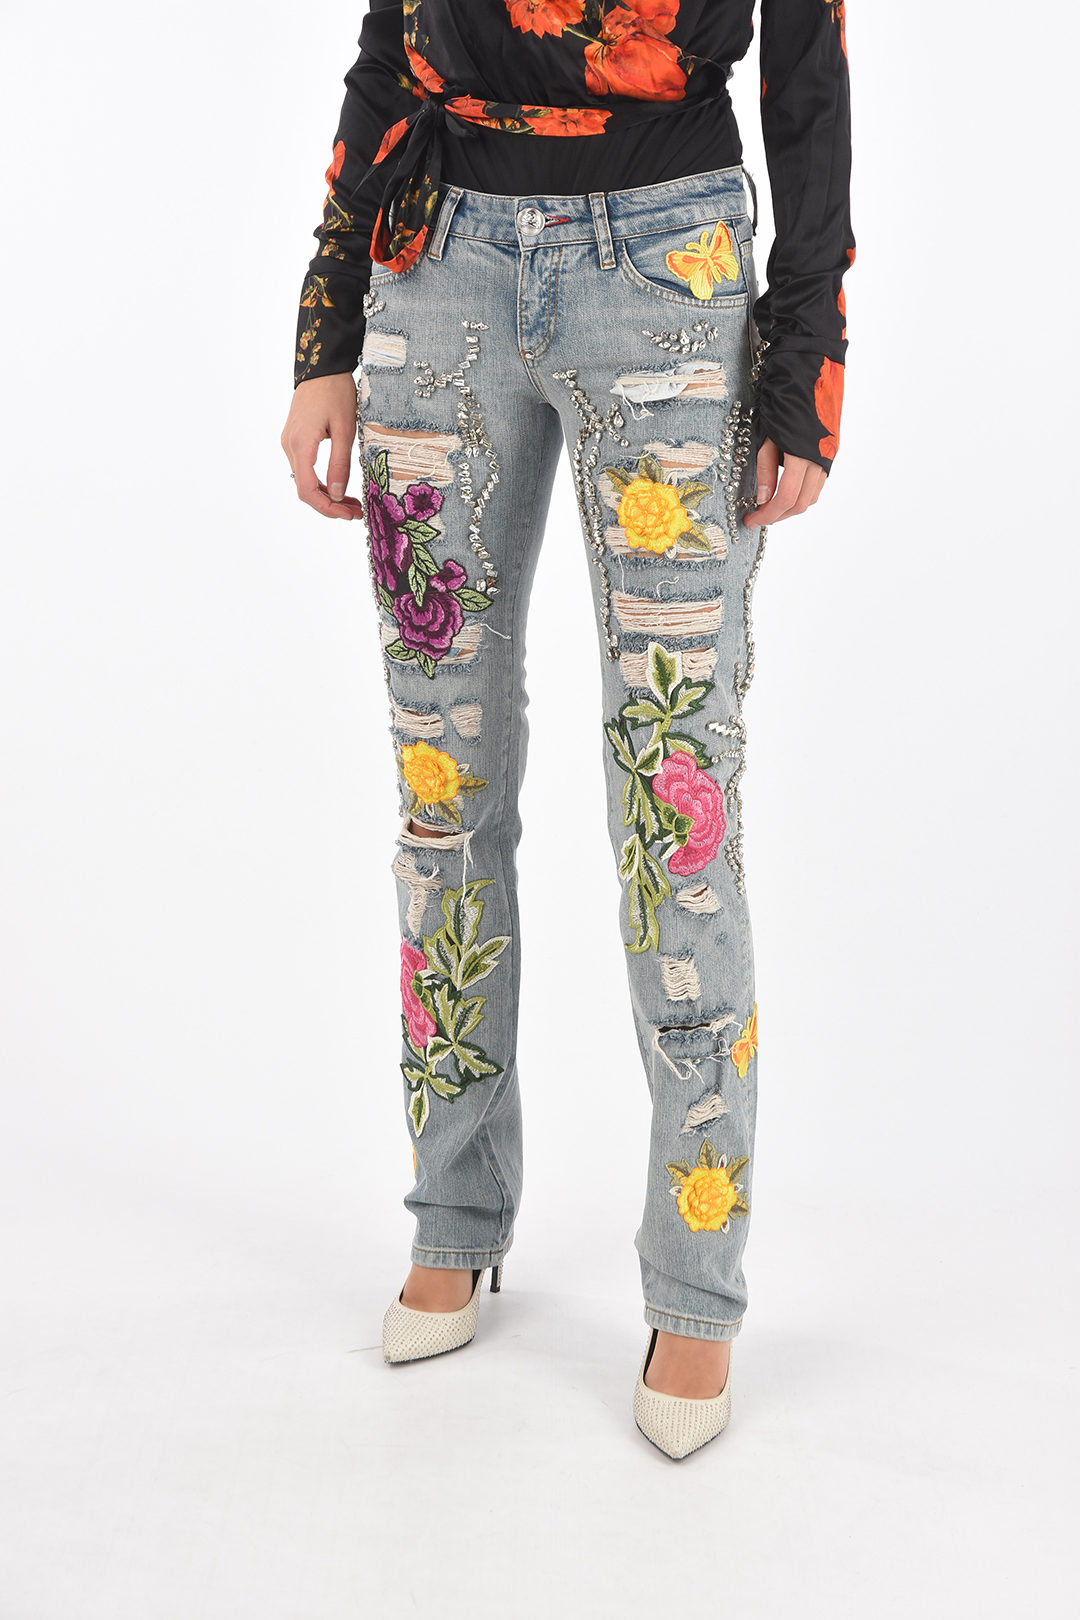 wees stil aardbeving Zorgvuldig lezen Philipp Plein crystal all over distressed FABULOUS straight cut jeans women  - Glamood Outlet